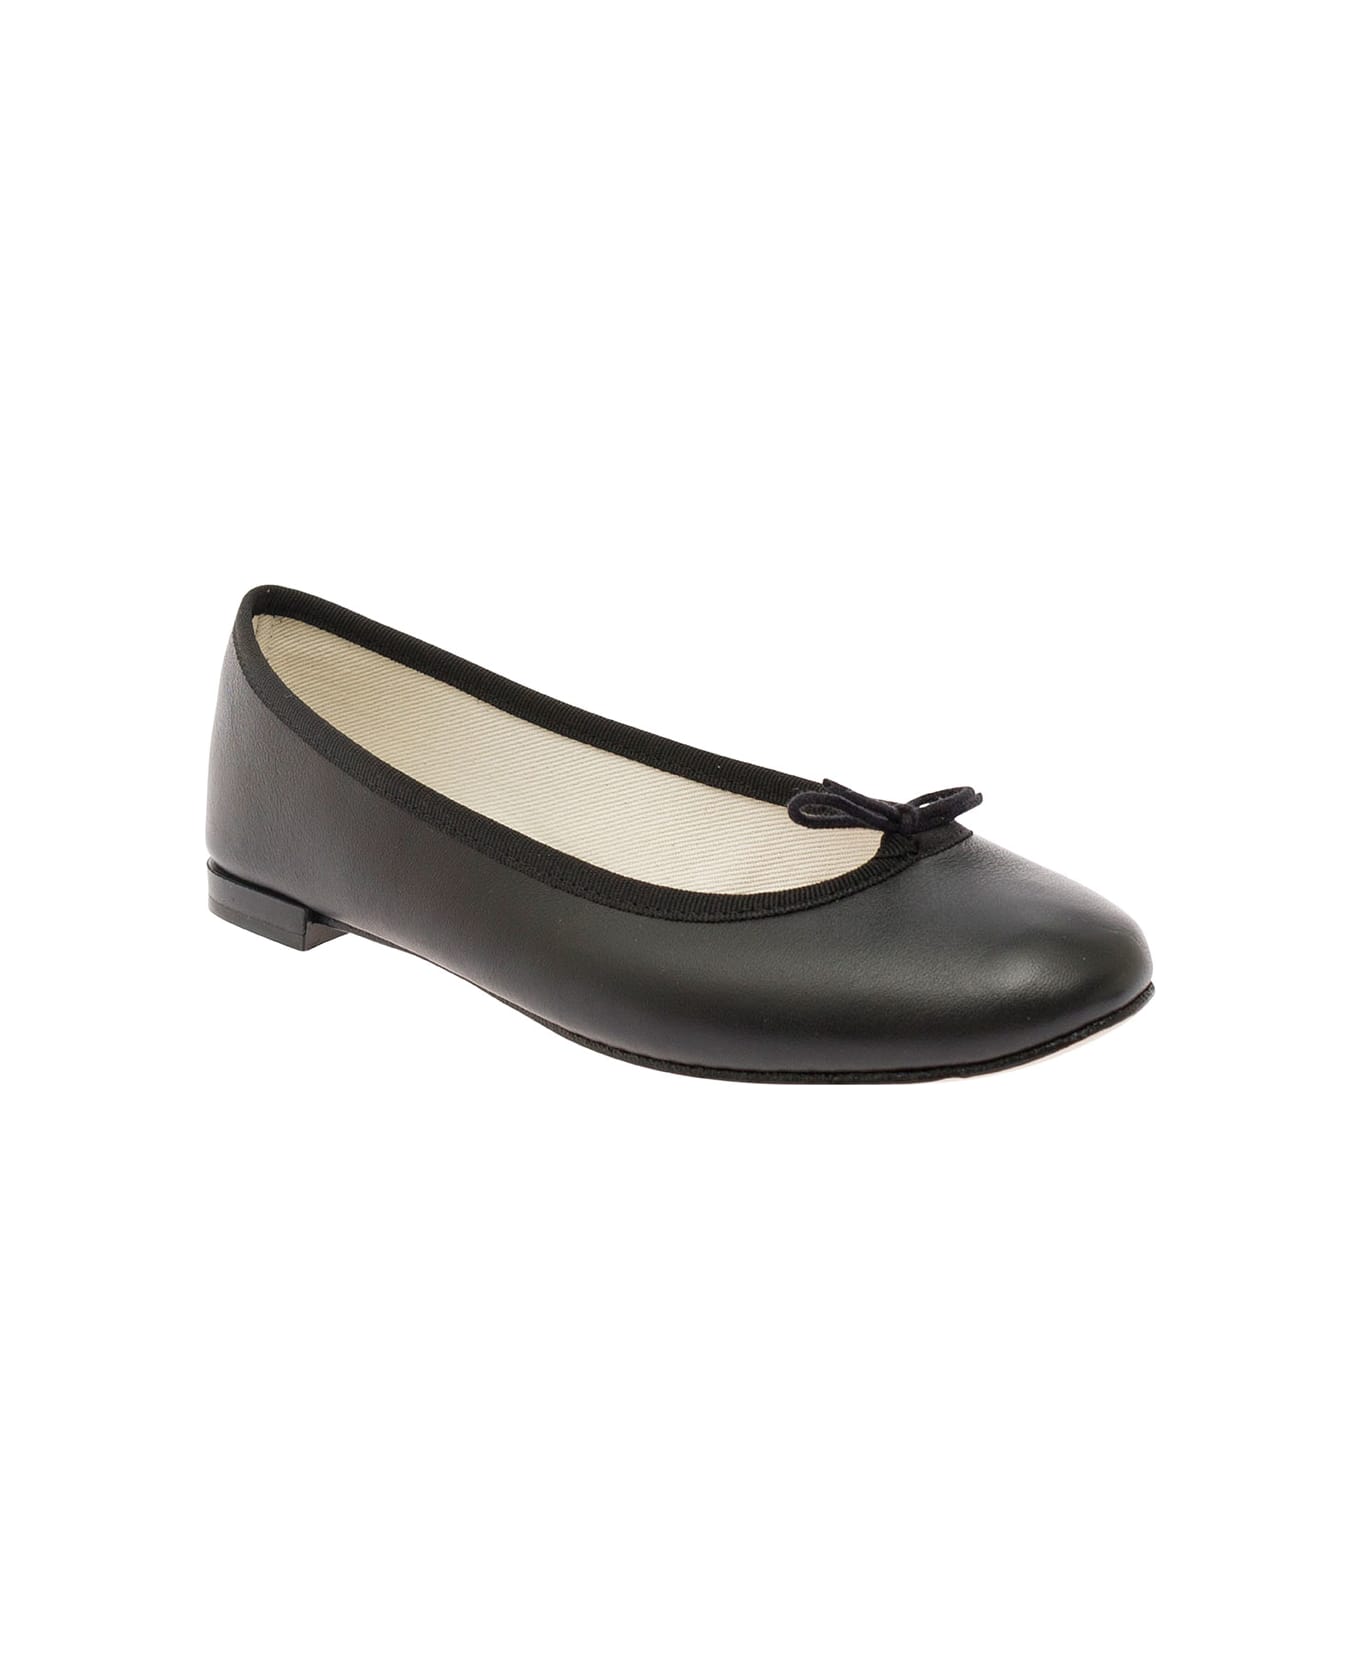 Repetto 'cendrillon' Black Ballet Flats With Bow Detail In Smooth Leather Woman - Black フラットシューズ